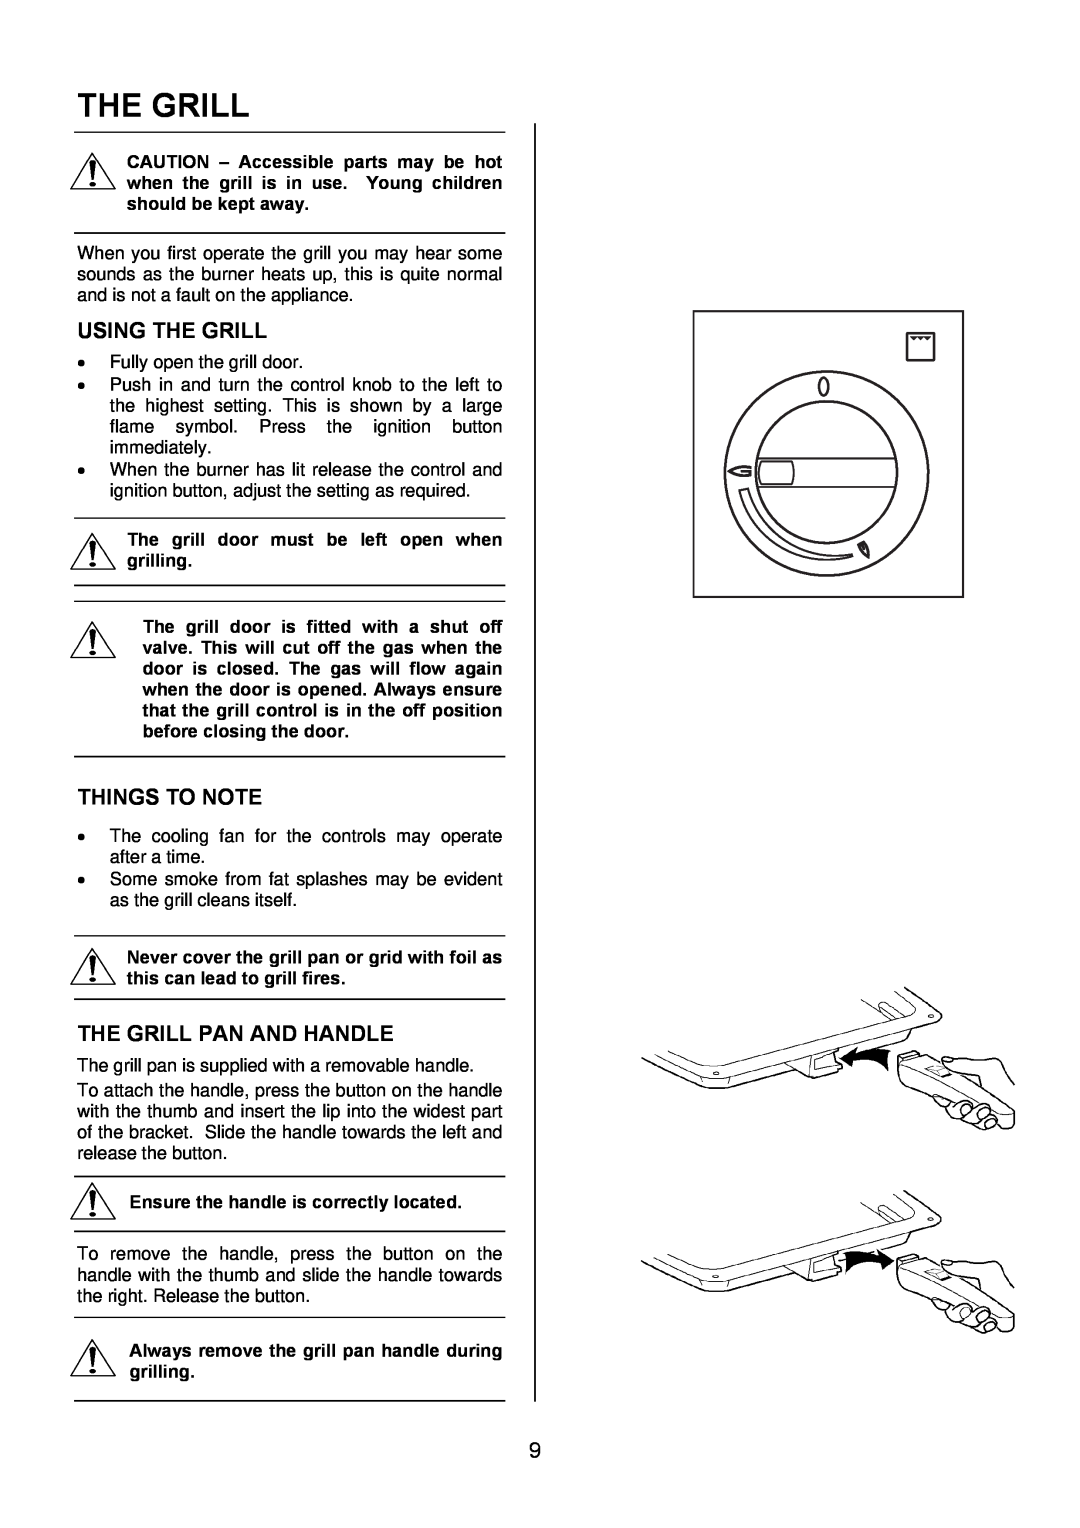 Electrolux EKG5542, EKG5543 manual Using The Grill, The Grill Pan And Handle, Things To Note 